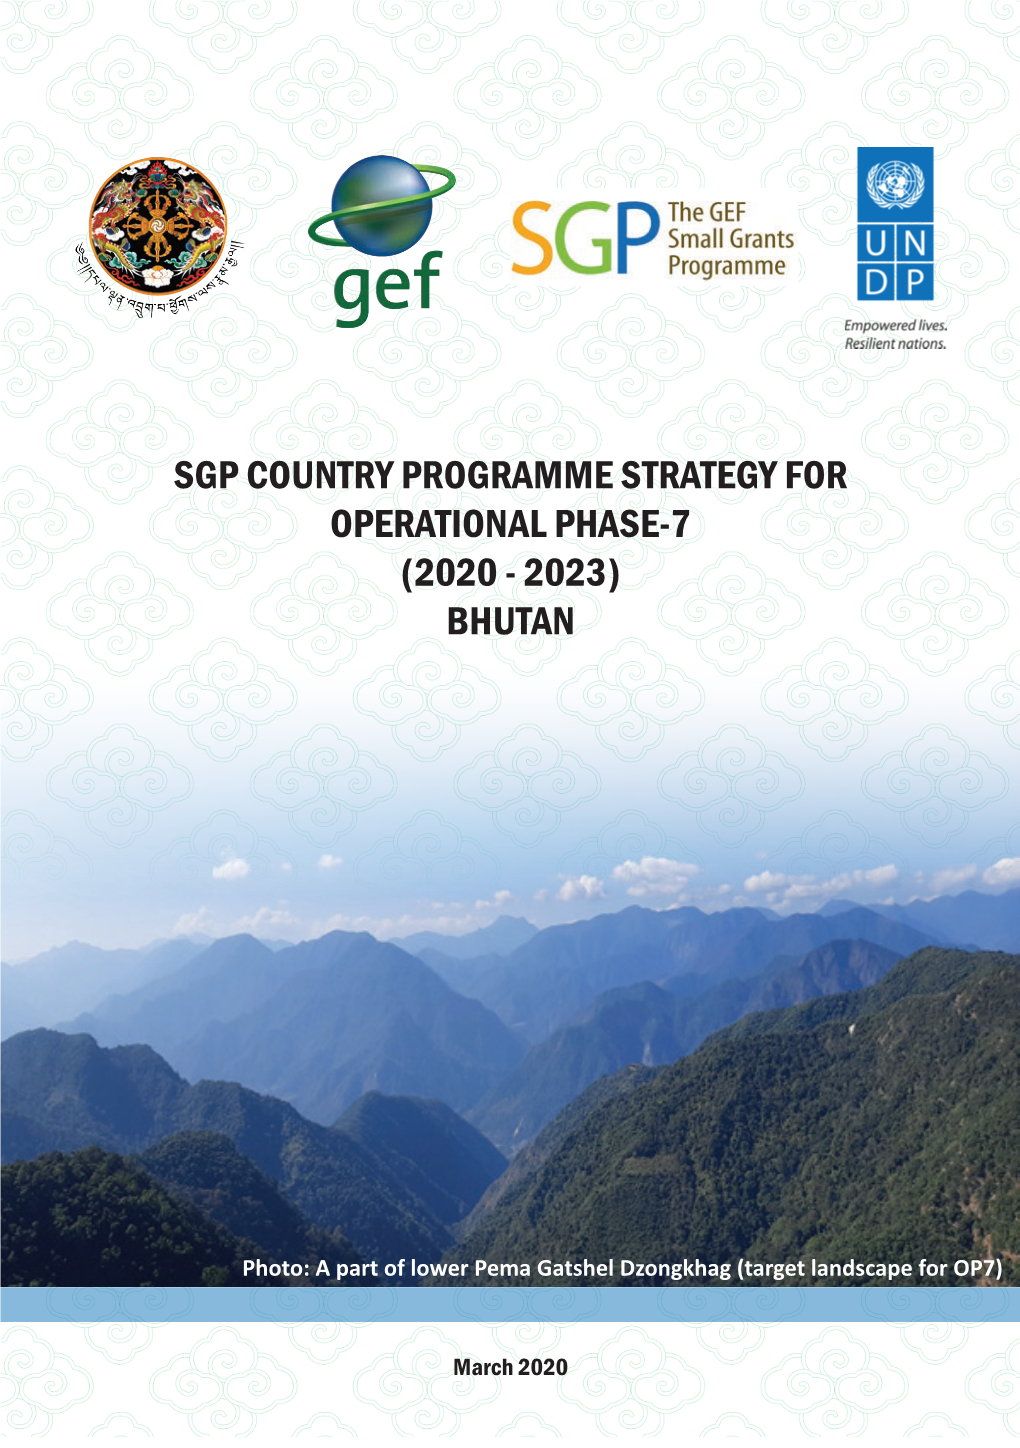 Sgp Country Programme Strategy for Operational Phase-7 (2020 - 2023) Bhutan